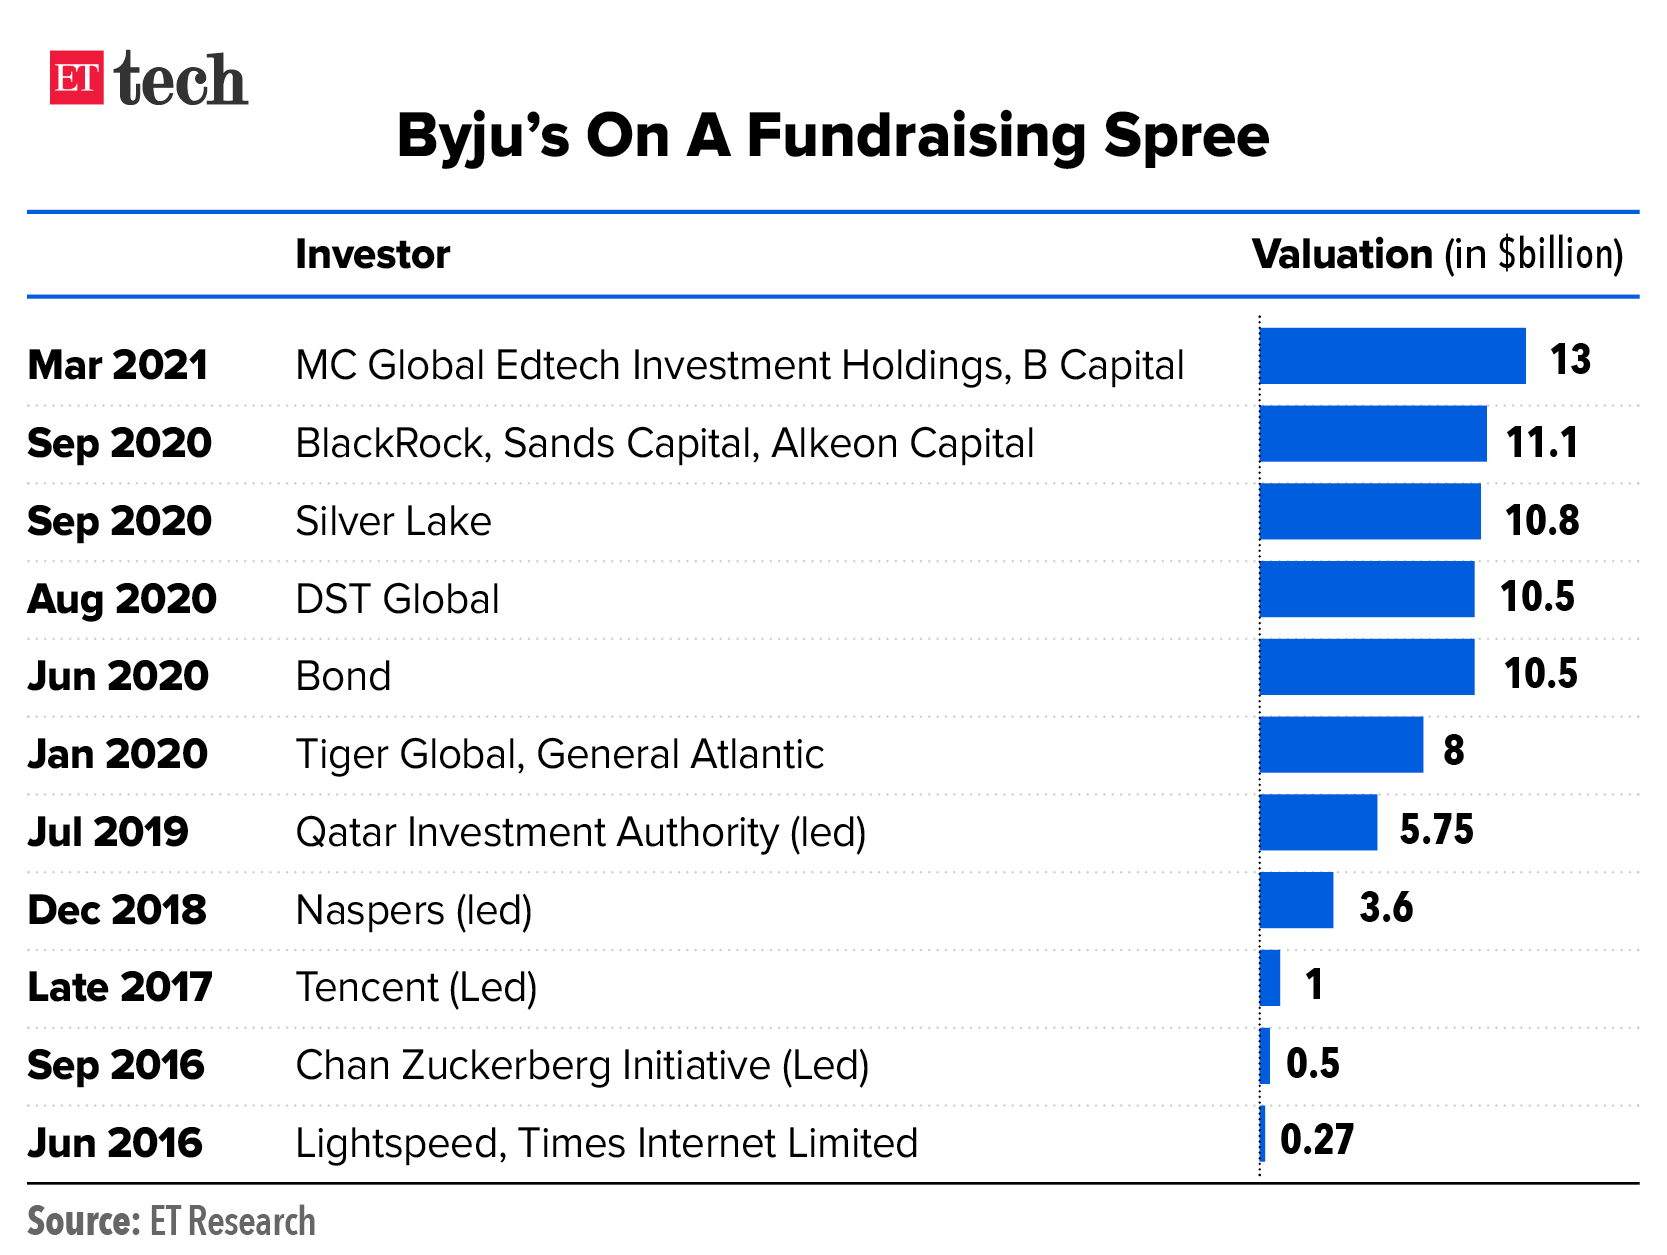 Byjus On A Fundraising Spree